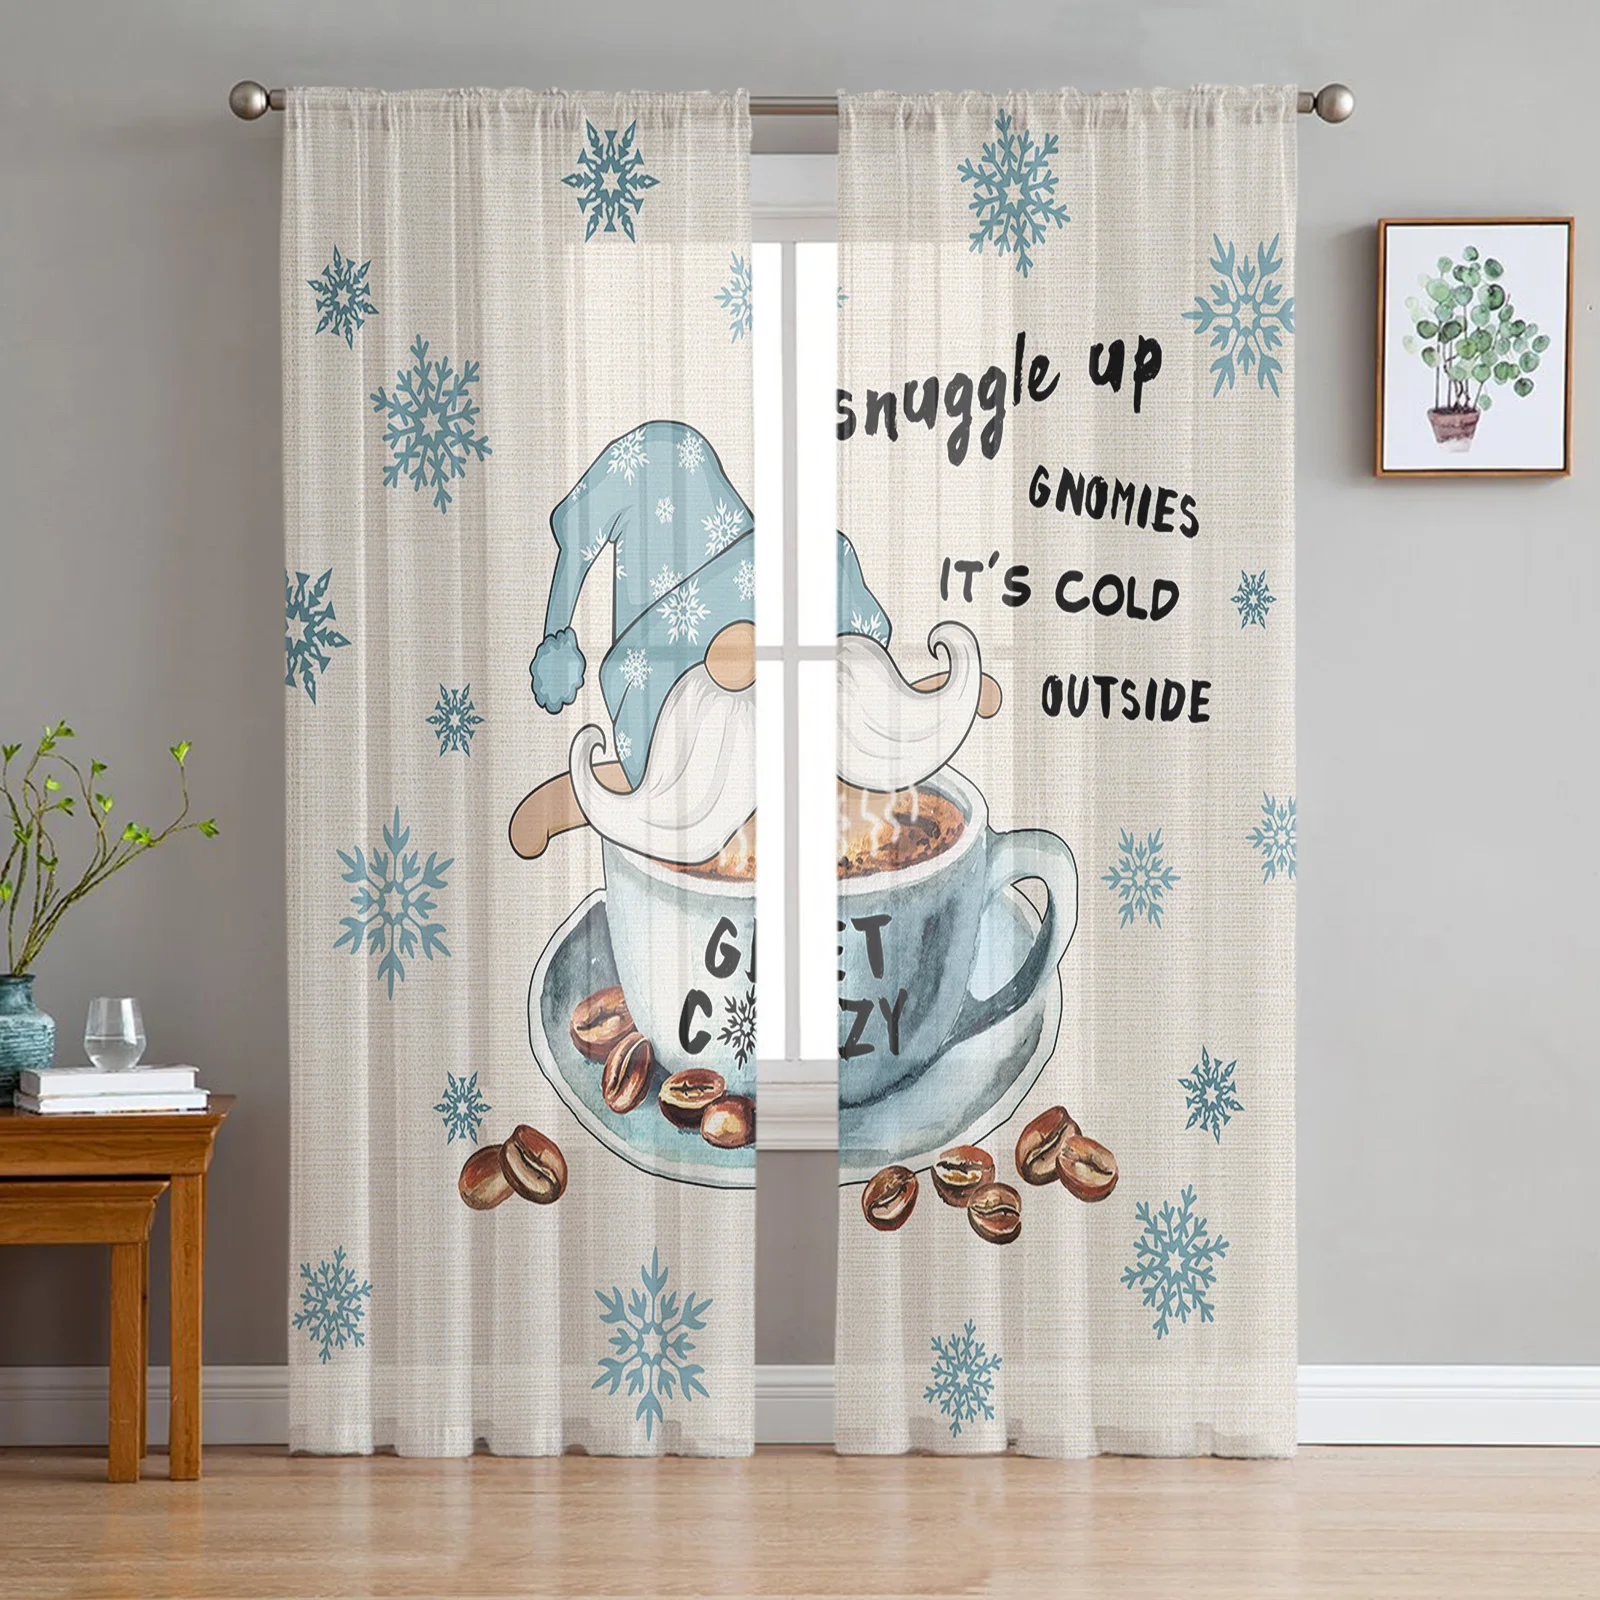 

Coffee Gnome Snowflake Winter Chiffon Sheer Voile Curtains for Living Room Bedroom Decoration Window Tulle Curtains Drapes